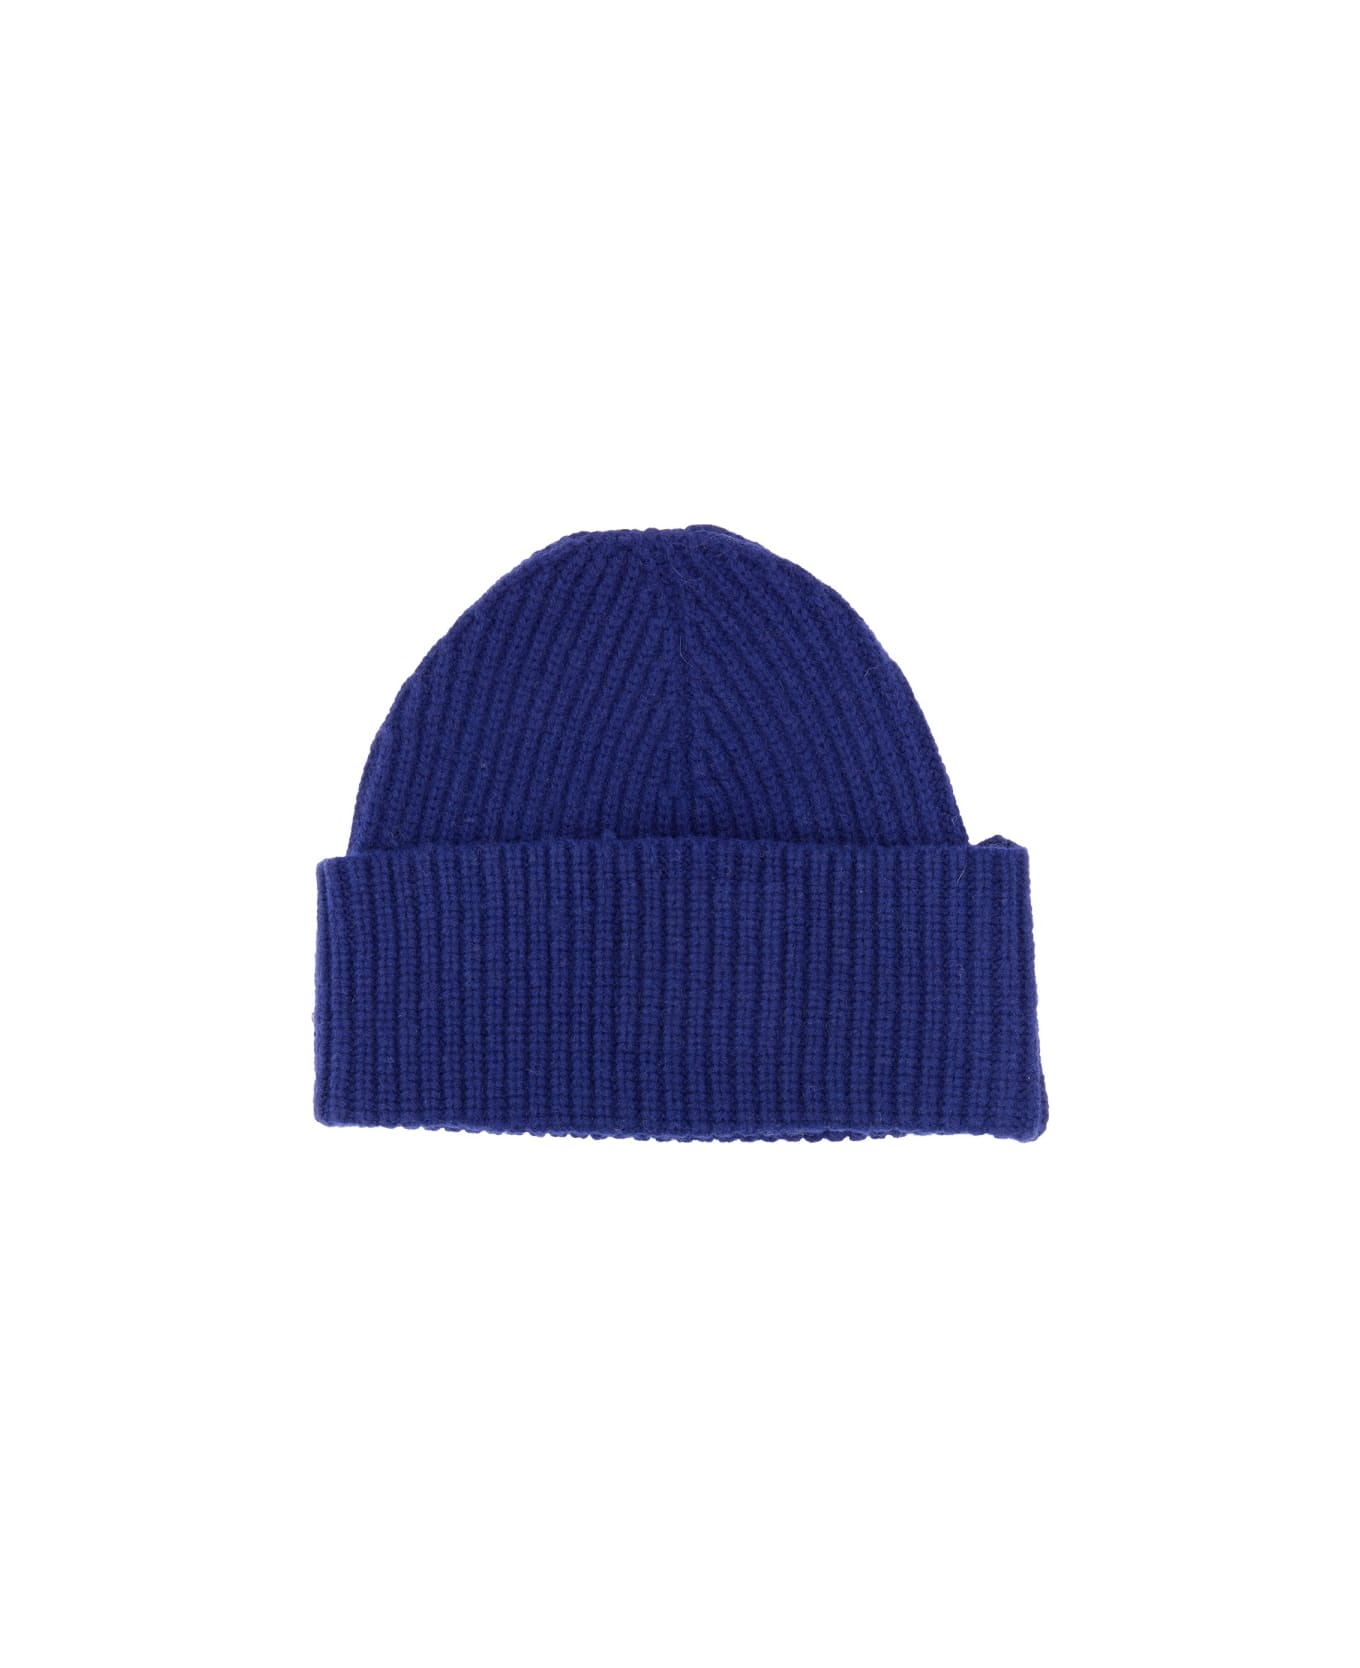 Axel Arigato Beanie Hat With Logo - BLUE